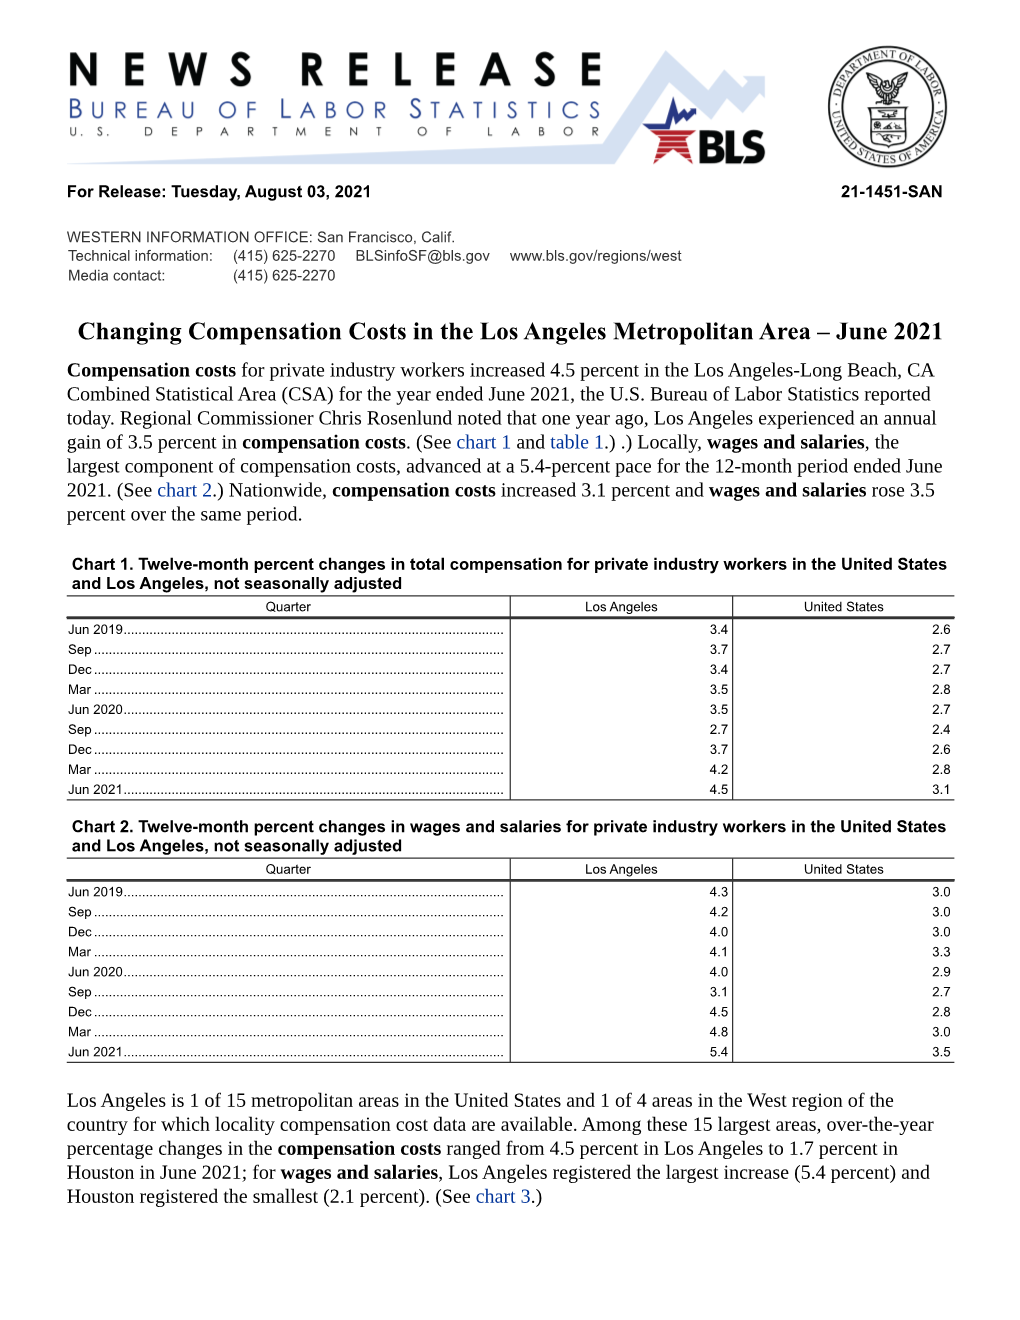 Changing Compensation Costs in the Los Angeles Metropolitan Area